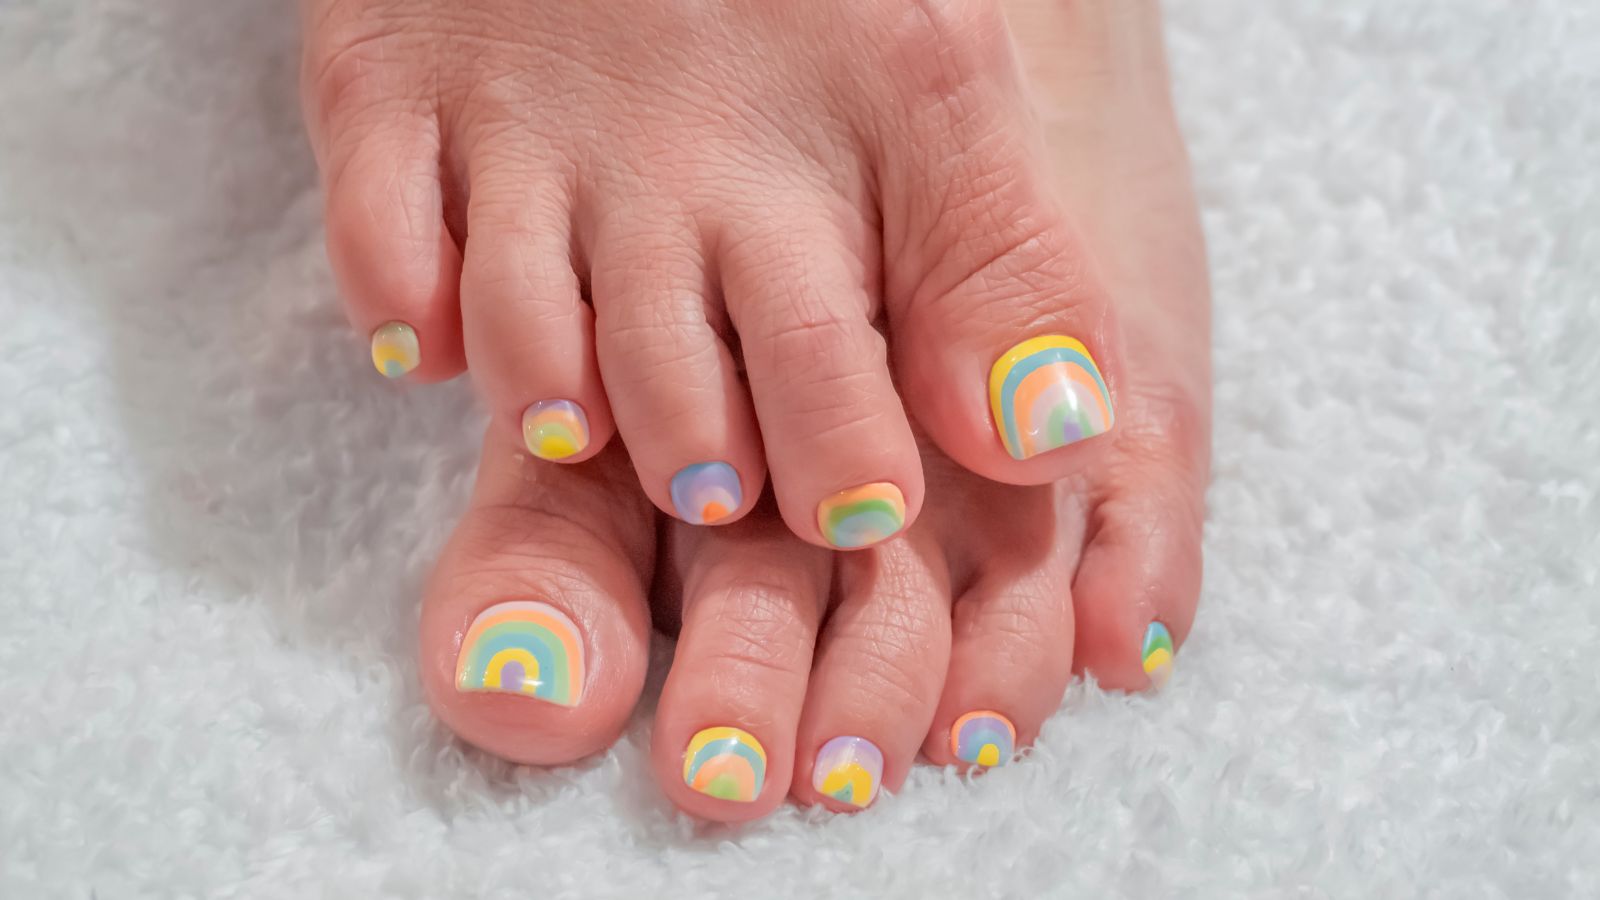 40 Short Nail Design Ideas For Any Occasion - Let's Eat Cake